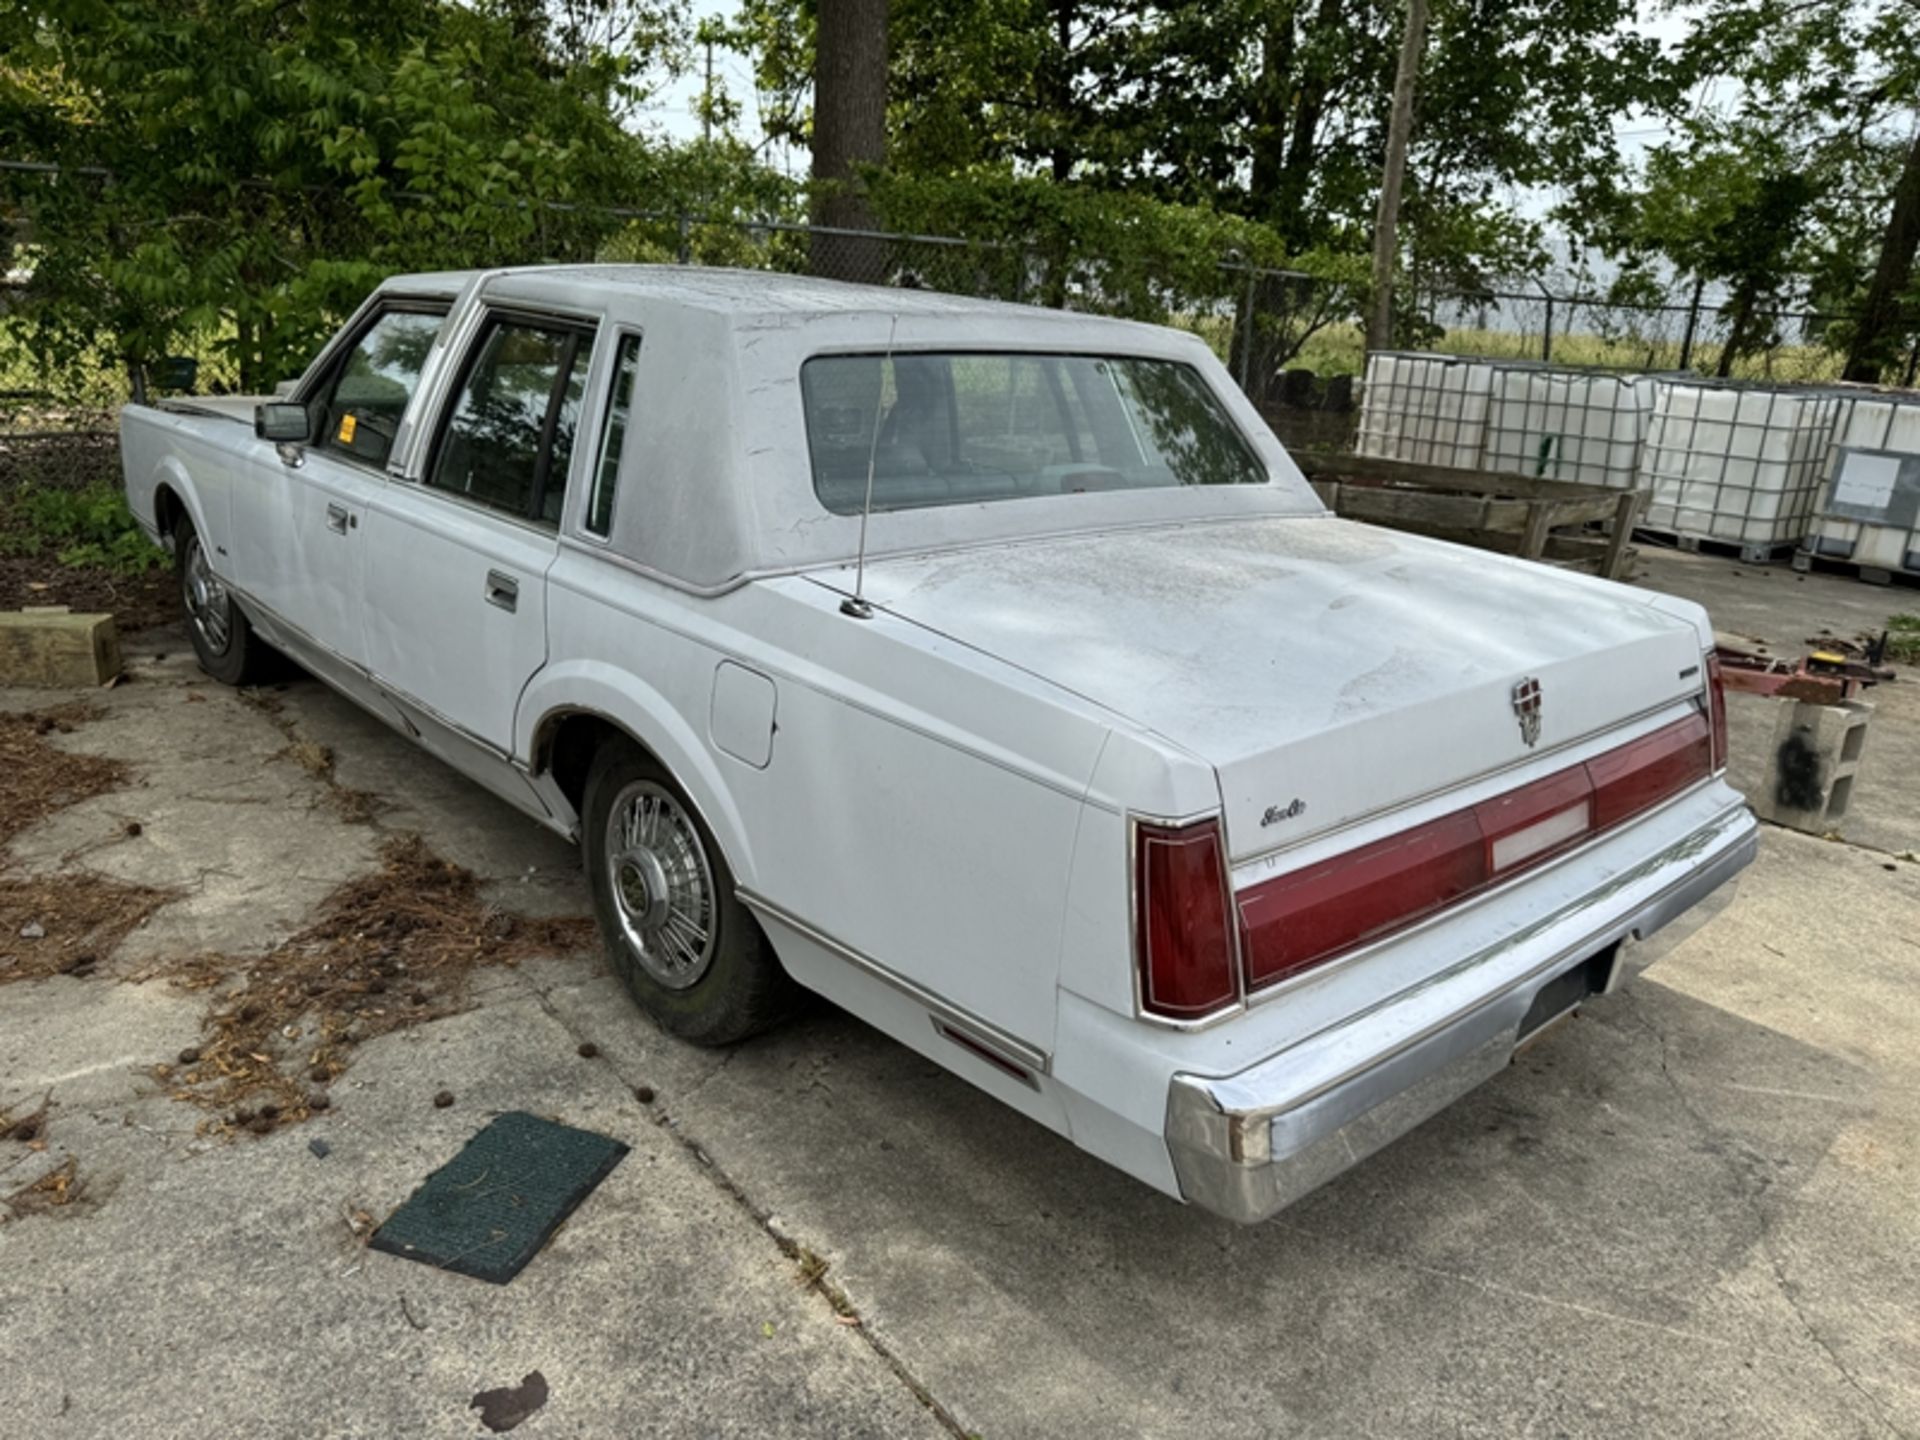 1986 LINCOLN town car, not running – NO TITLE – mileage unknown – 1LNBP96F5GY646629 - Image 4 of 6